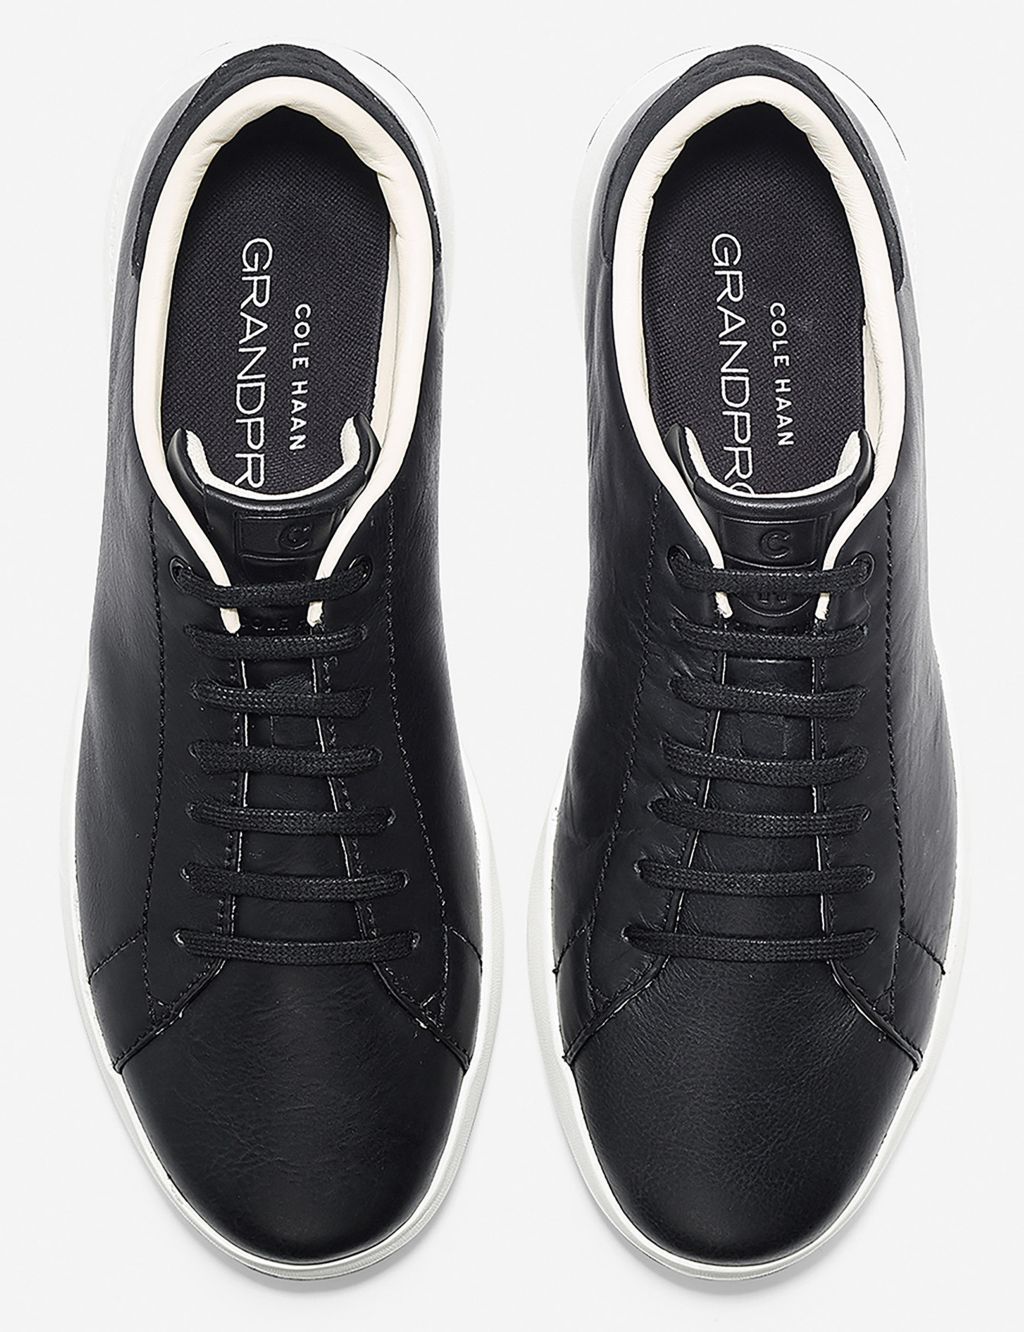 Grandpro Leather Lace Up Trainers image 3